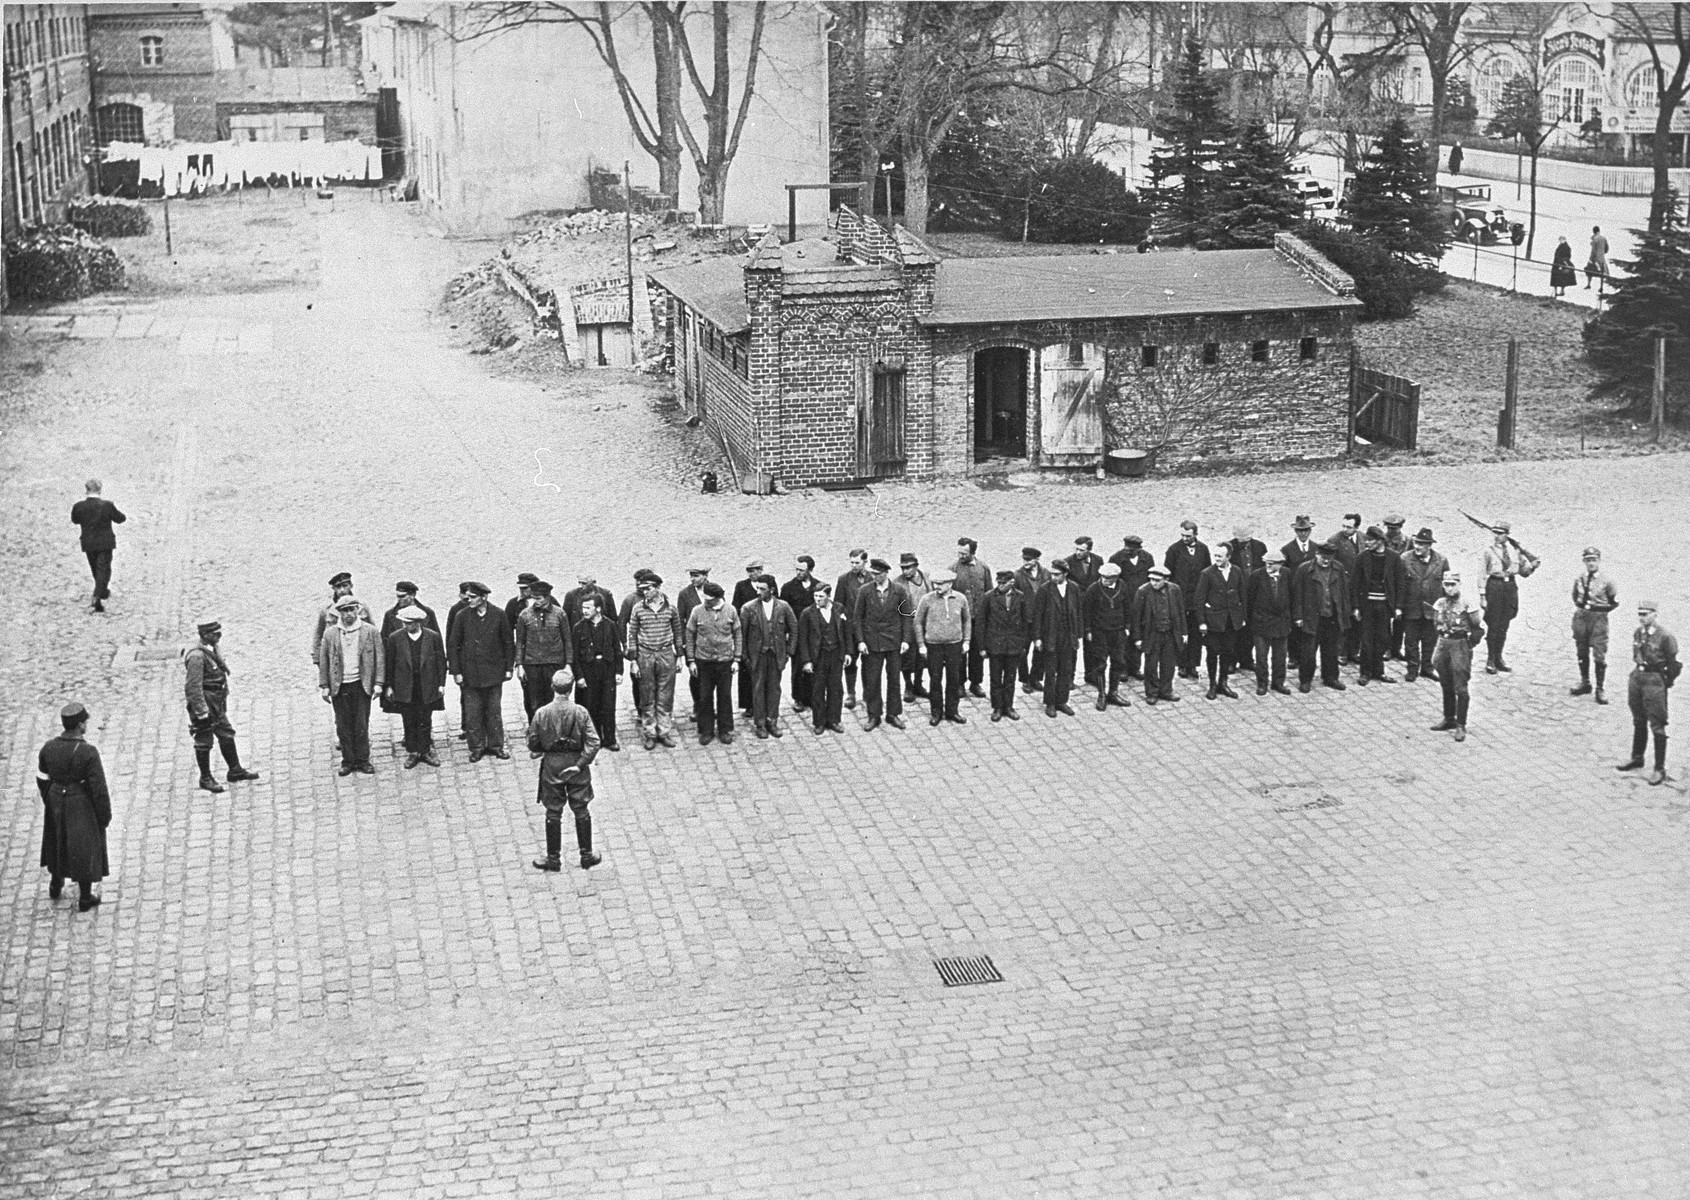 Prisoners guarded by SA men line up in the yard of the Oranienburg concentration camp on the Havel River in Germany.